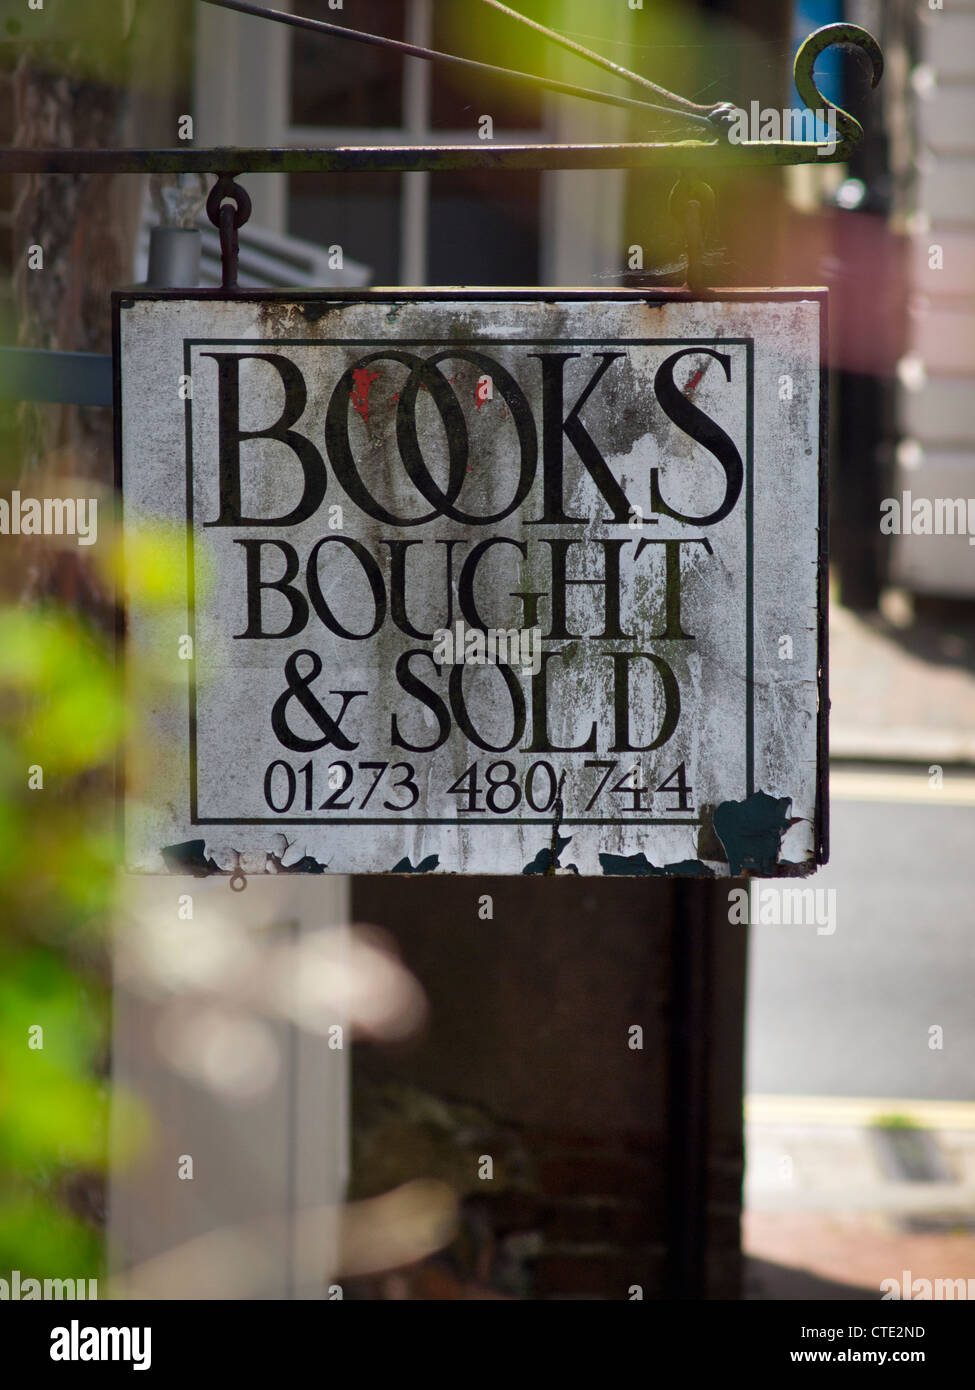 Down an alley in Lewes,East Sussex hangs a sign for a dealer in books. Stock Photo